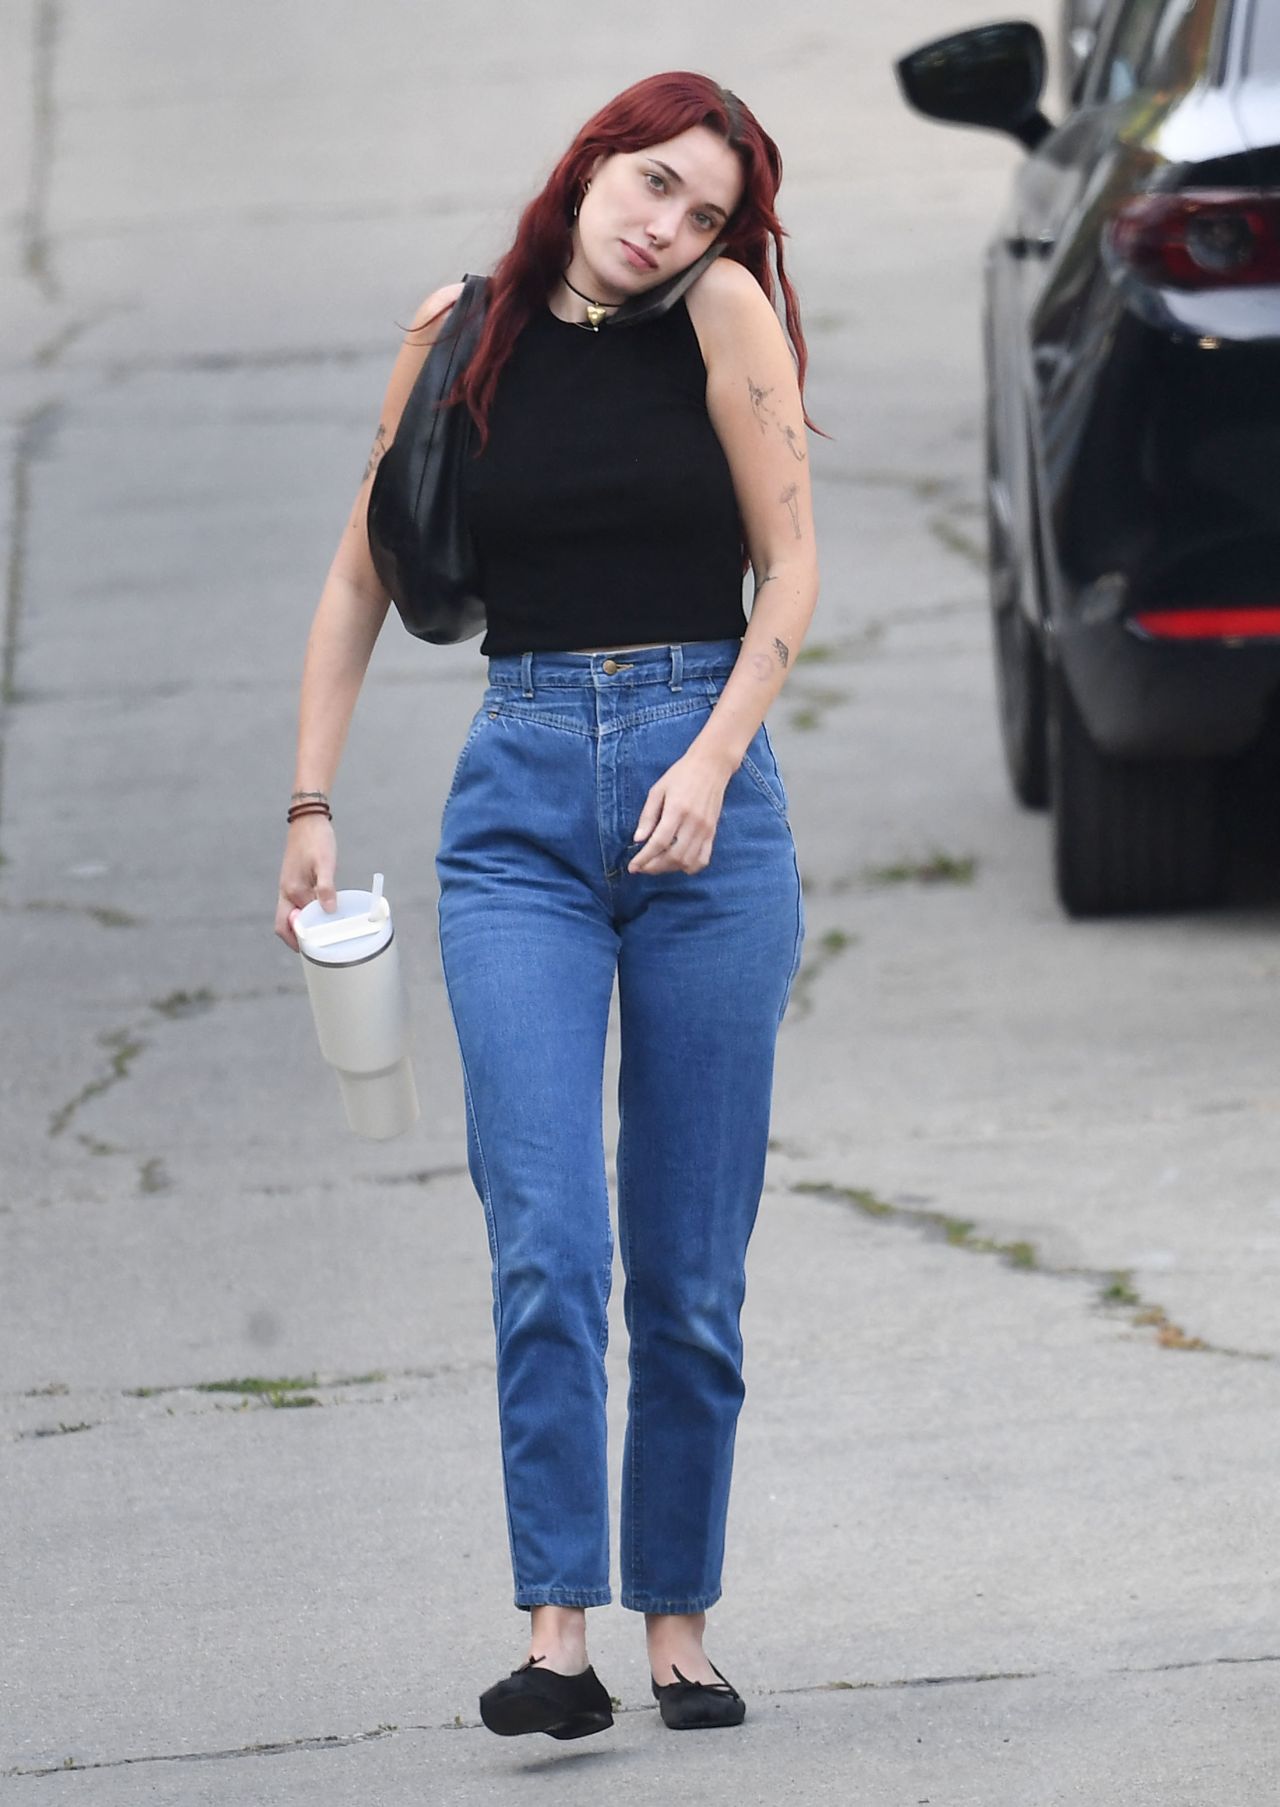 OLIVIA OBRIEN LEAVES A RECORDING STUDIO IN LOS ANGELES